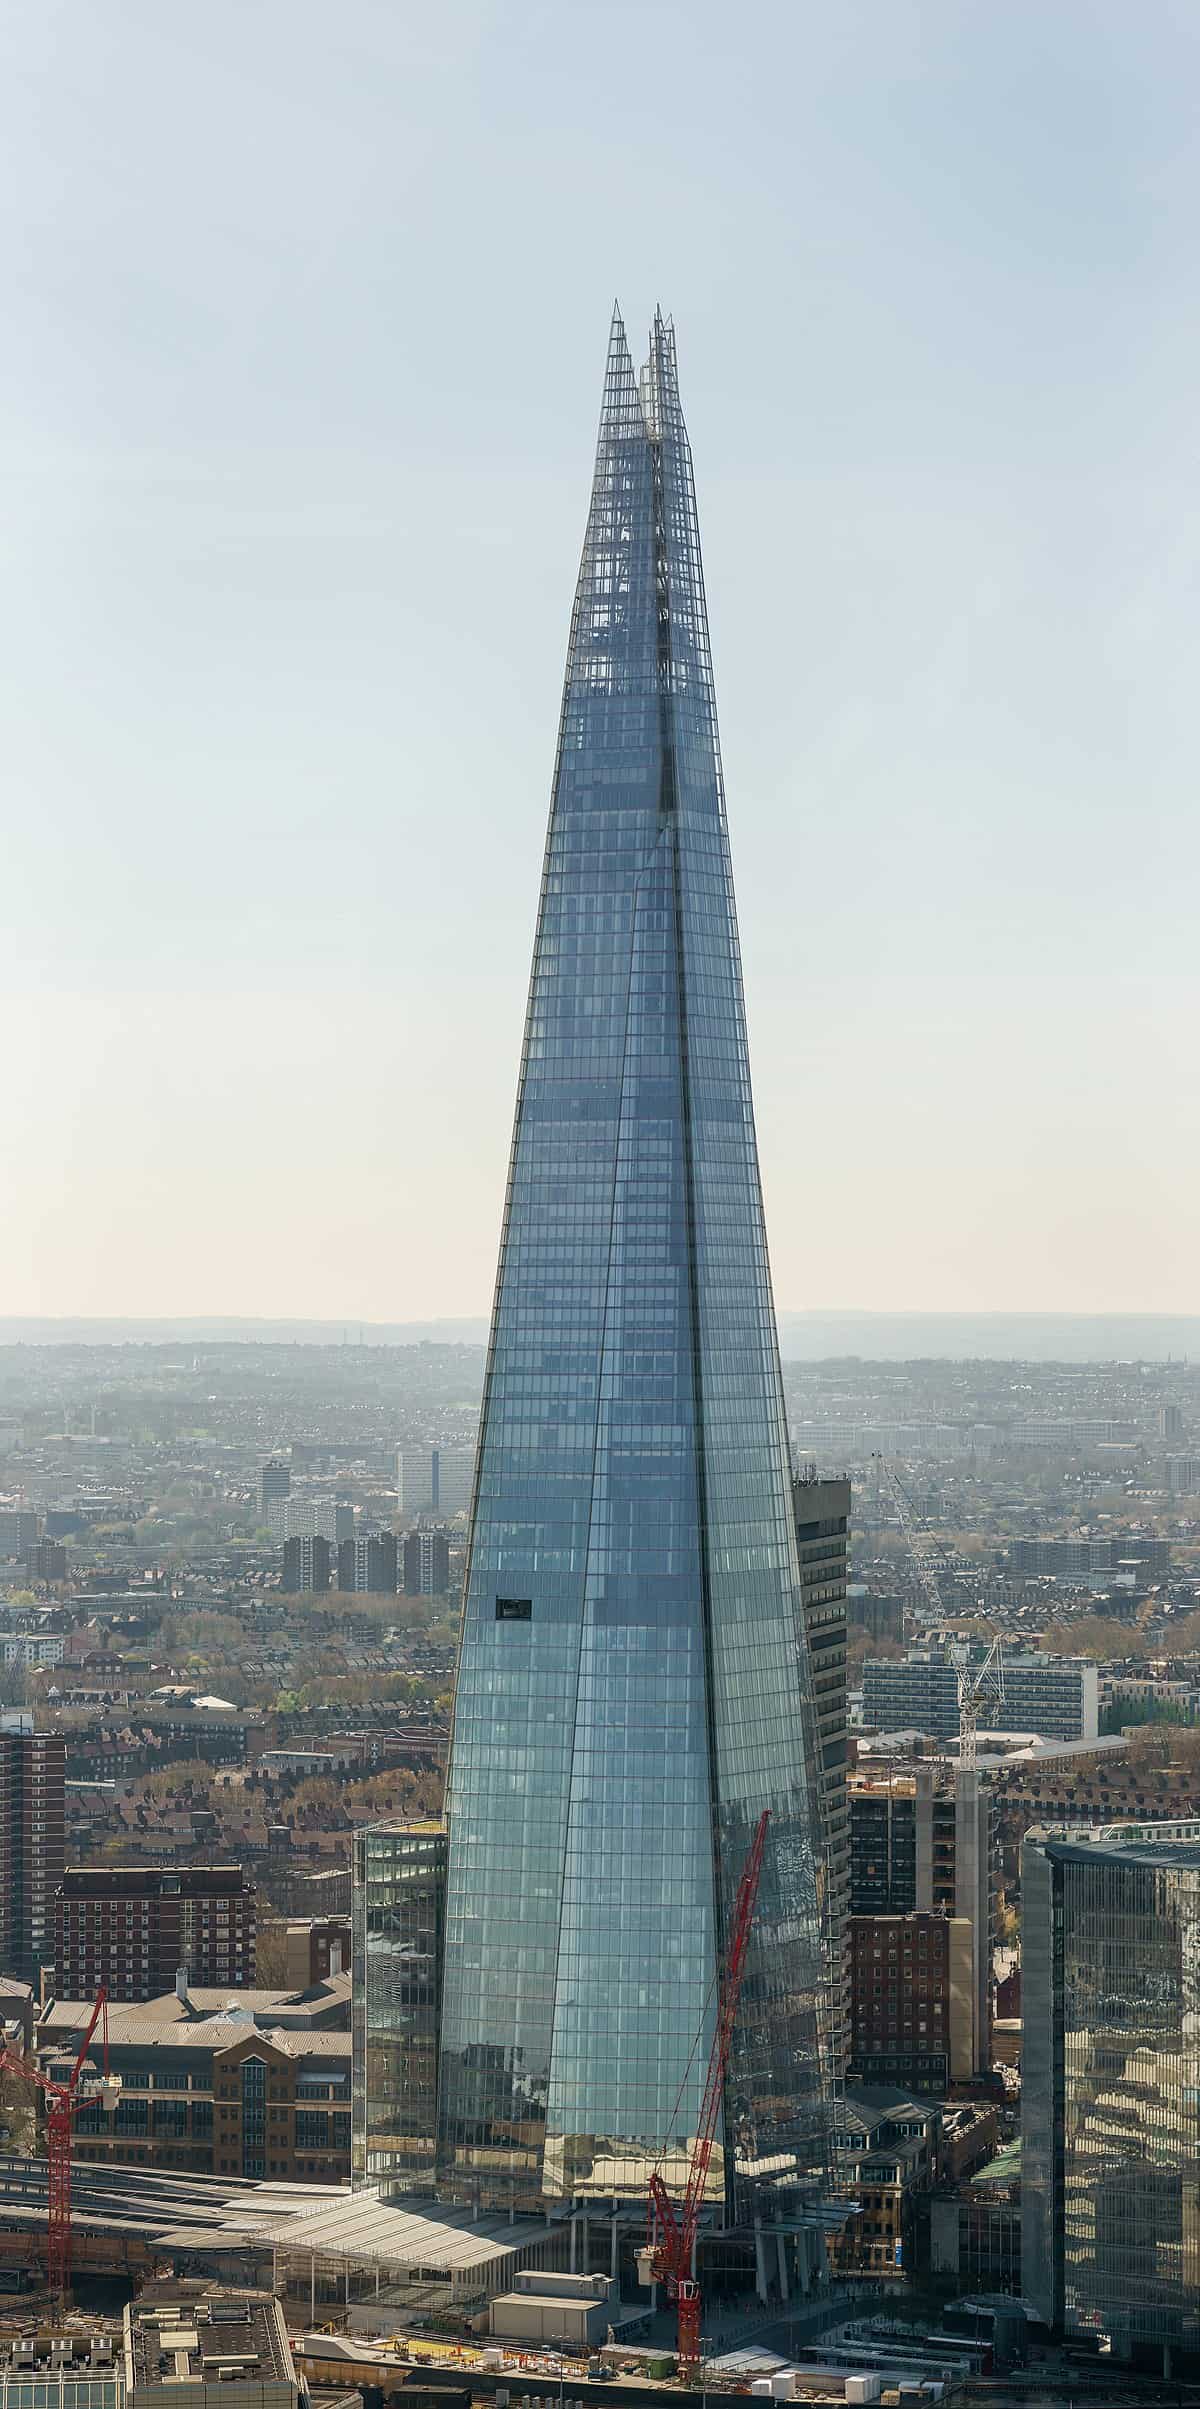 Tallest building of England